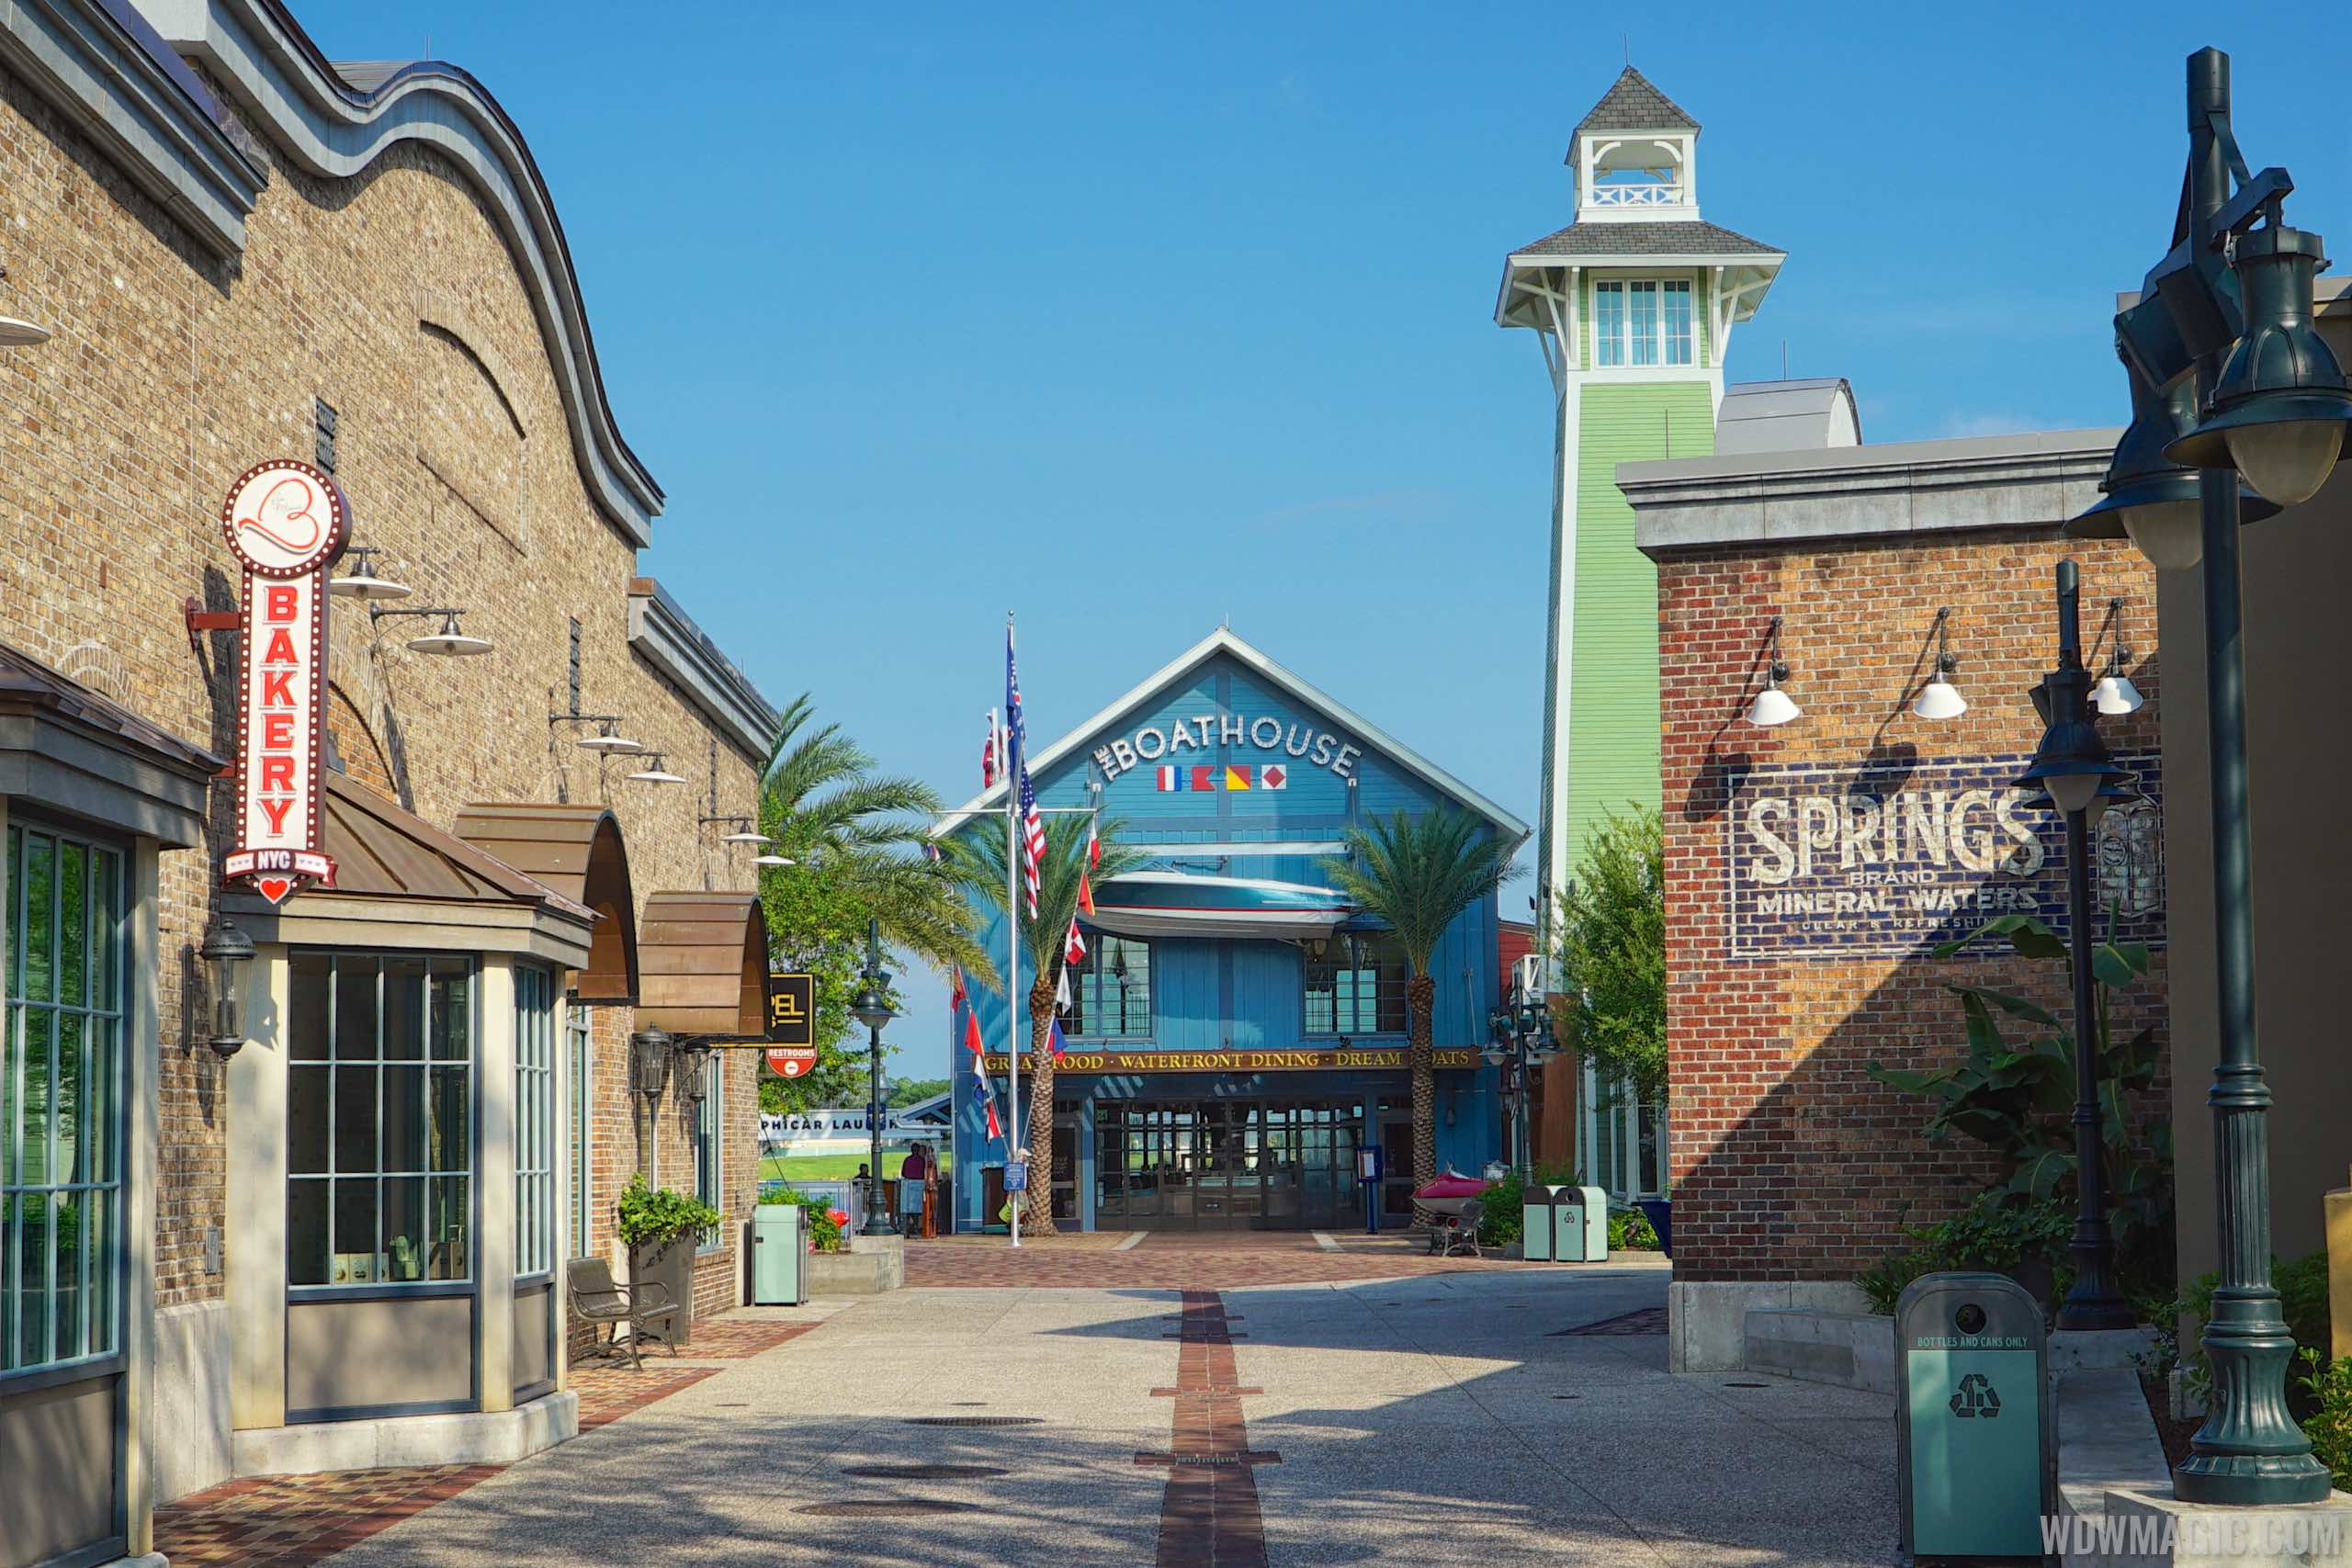 how can you get from magic kingdom to disney springs marketplace